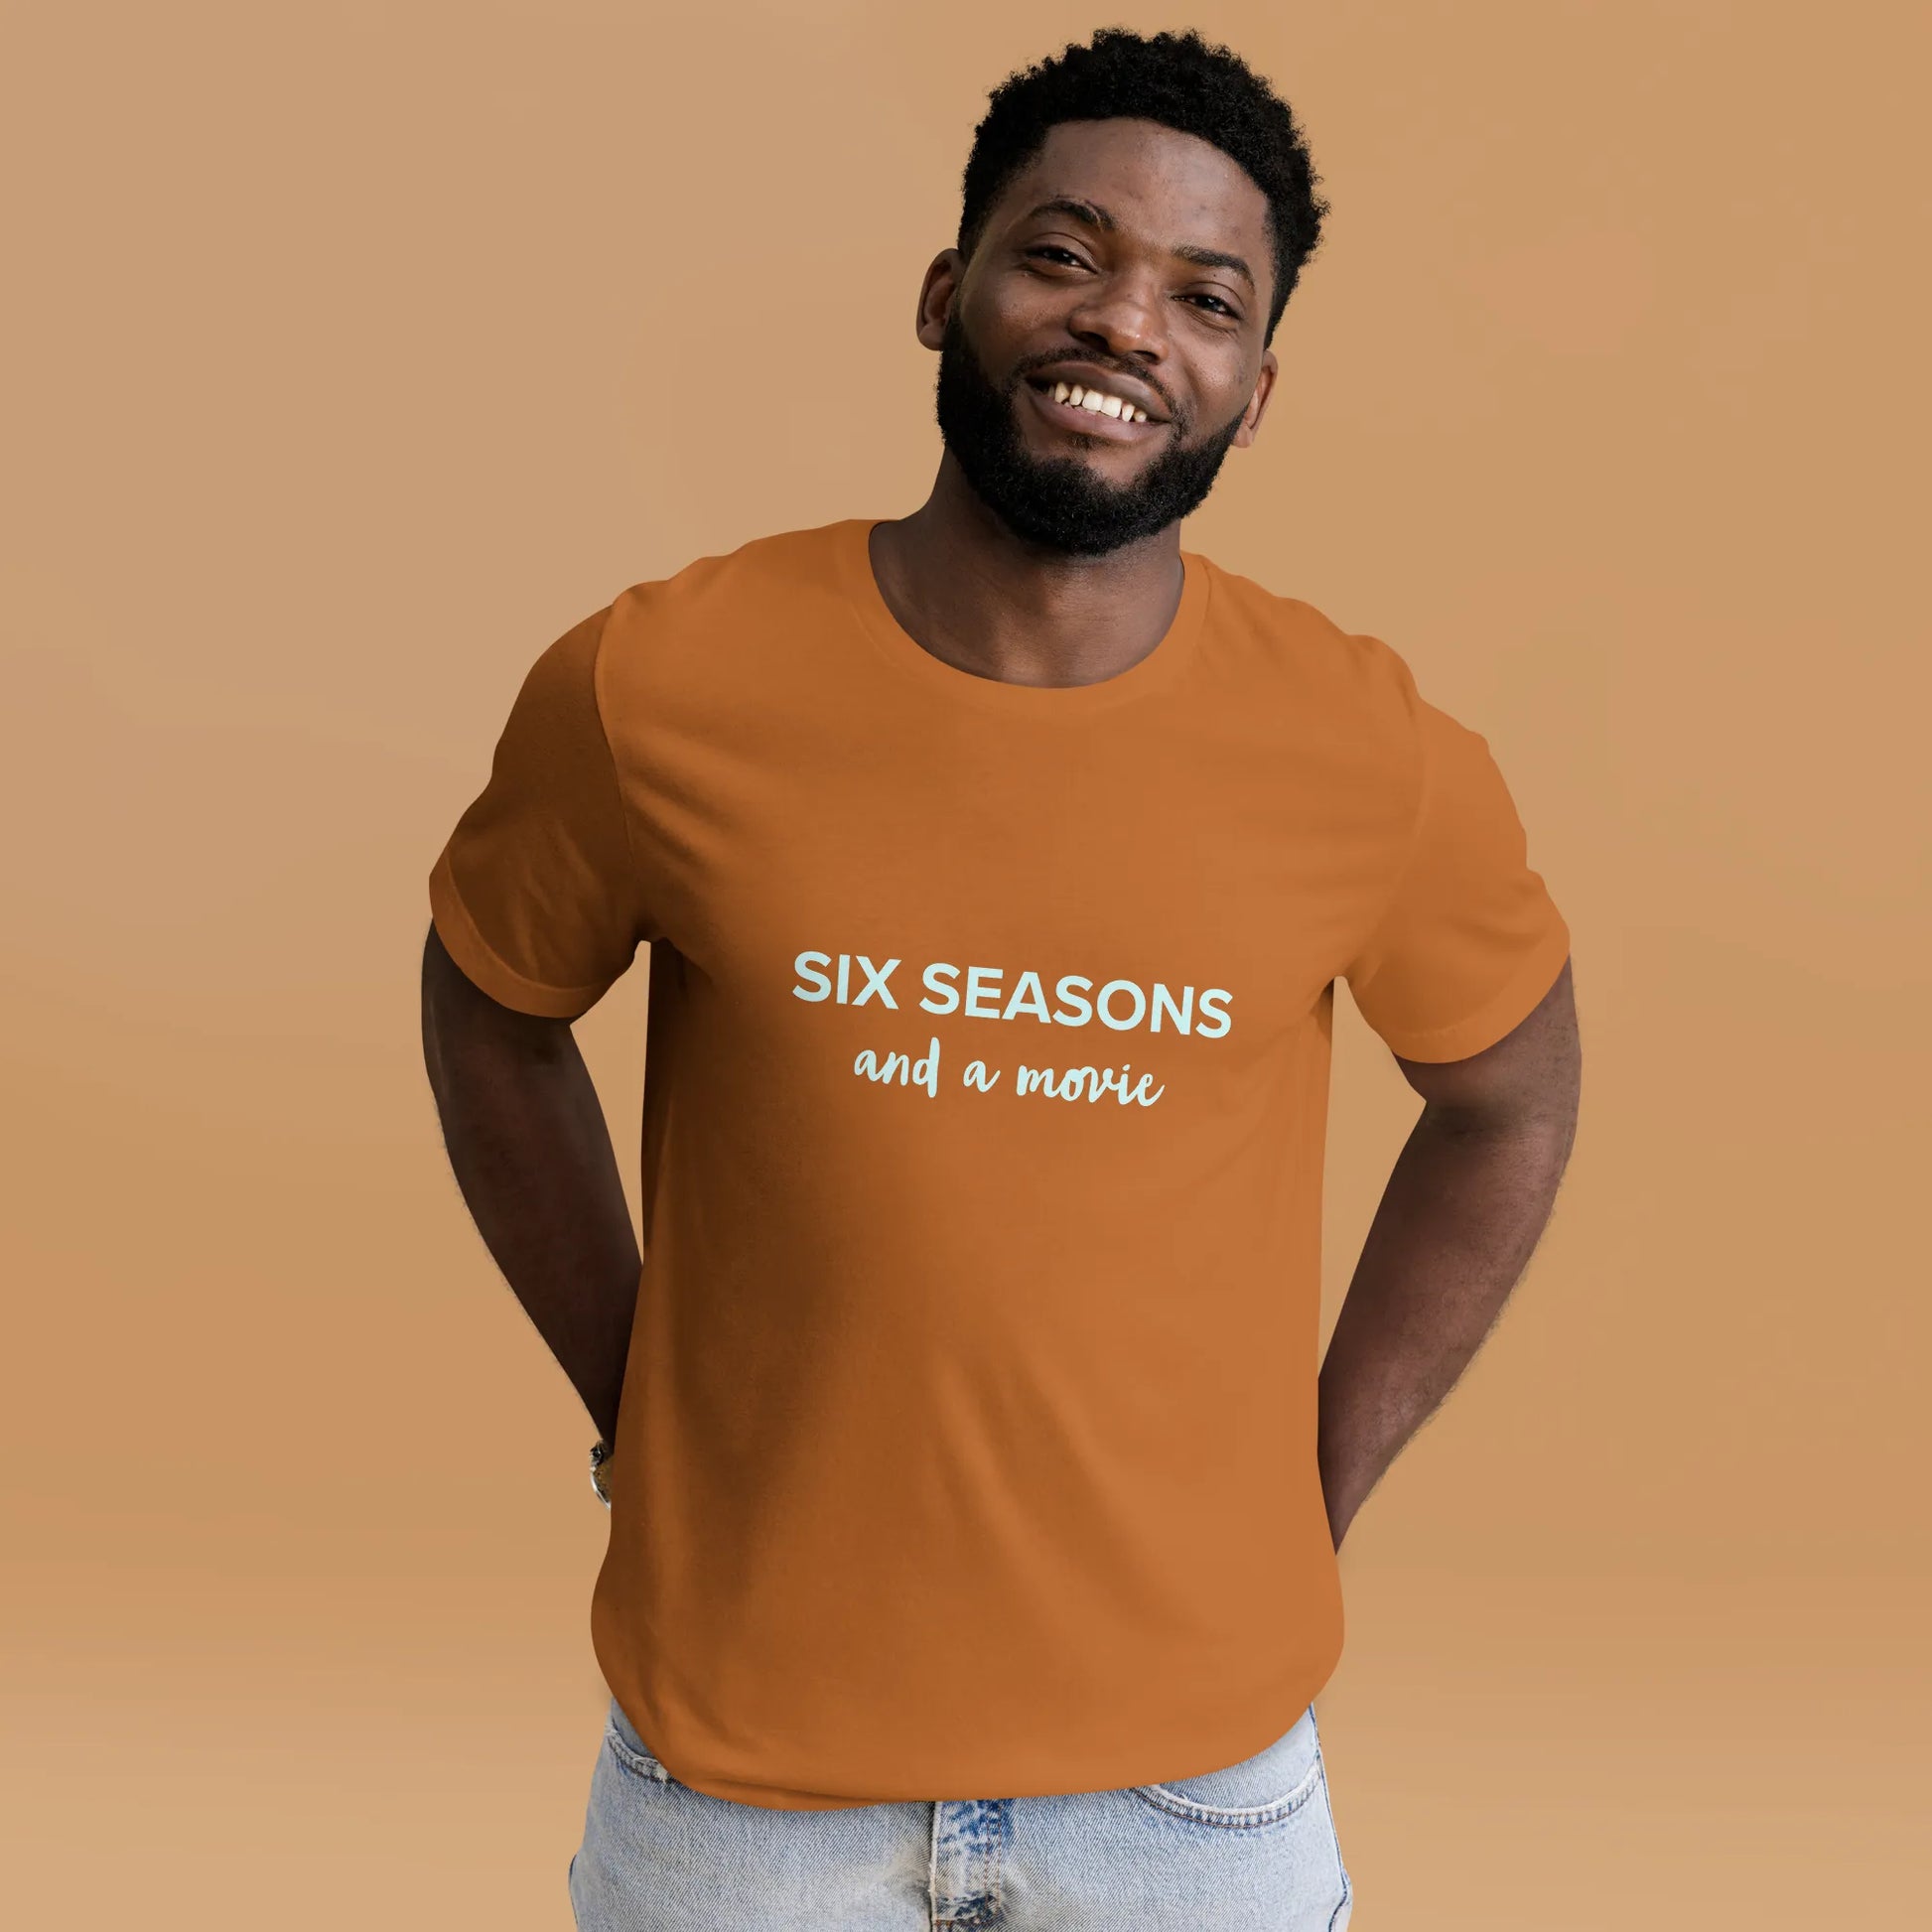 Six Seasons and a Movie Tee in toast on man